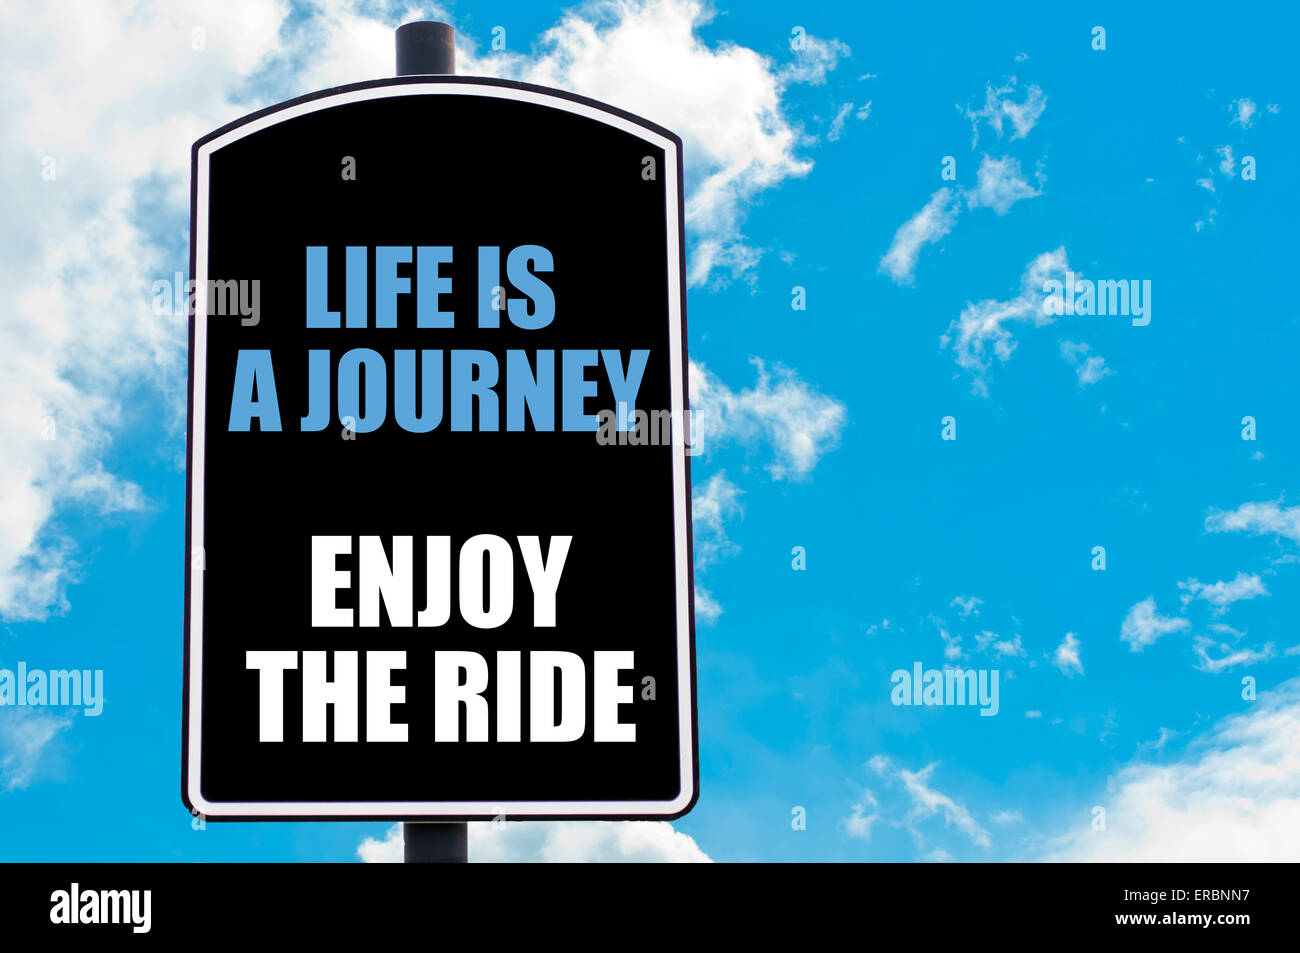 Motivational And Inspirational Quotes - Life Is A Beautiful Journey. Enjoy  The Ride. With Blurred Vintage Styled Background. Stock Photo, Picture and  Royalty Free Image. Image 104741503.